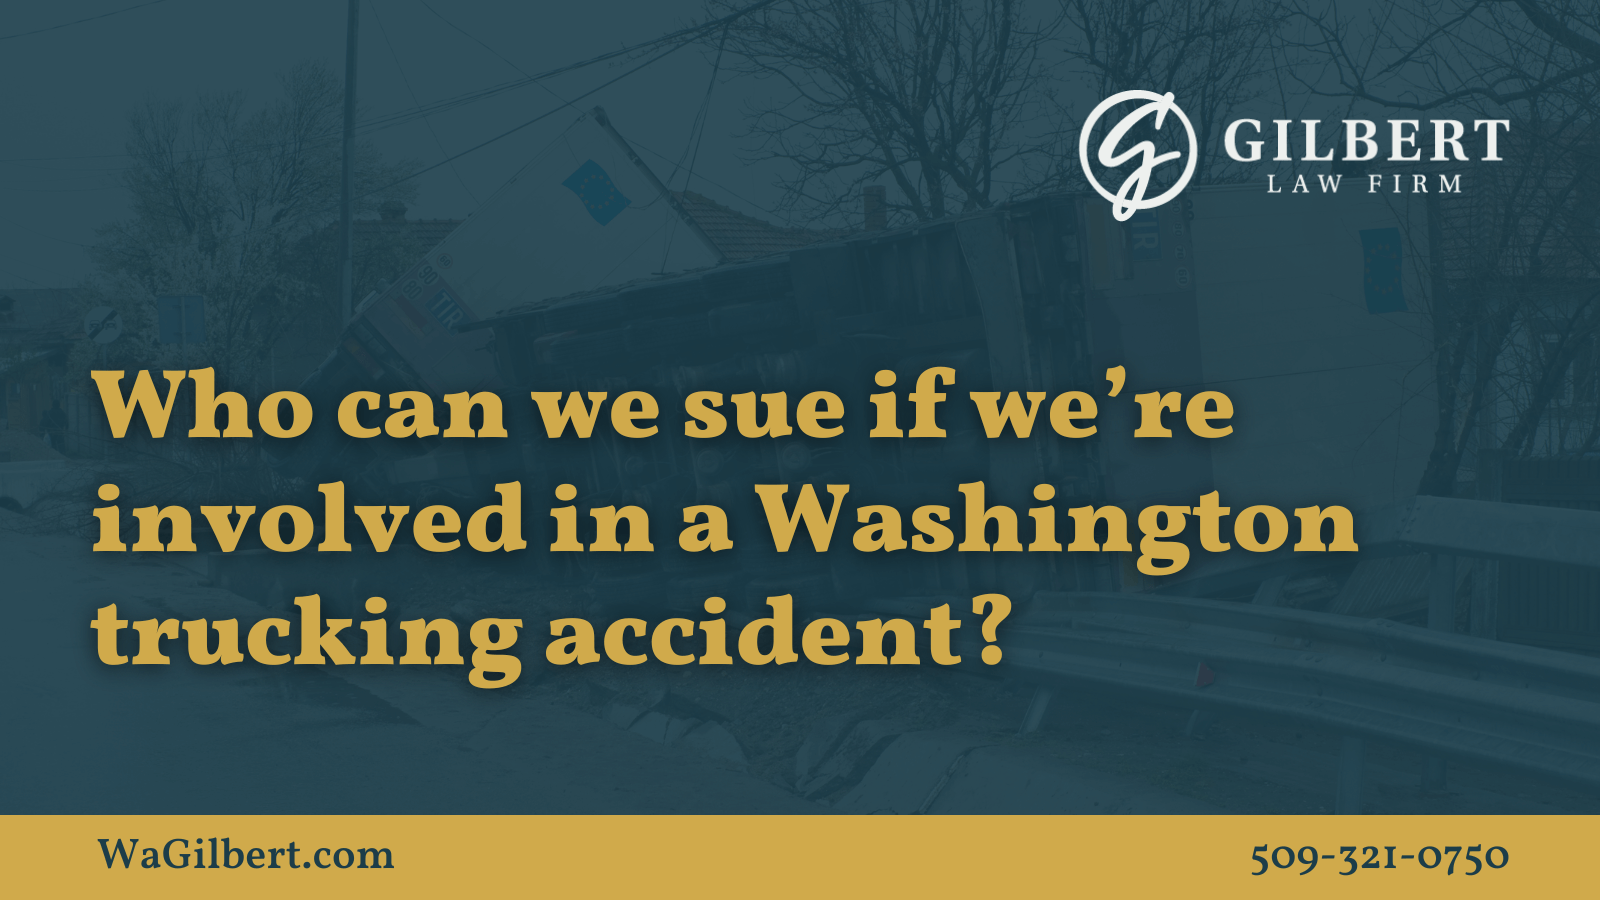 Who can we sue if we’re involved in a Washington trucking accident | Gilbert Law Firm Spokane Washington